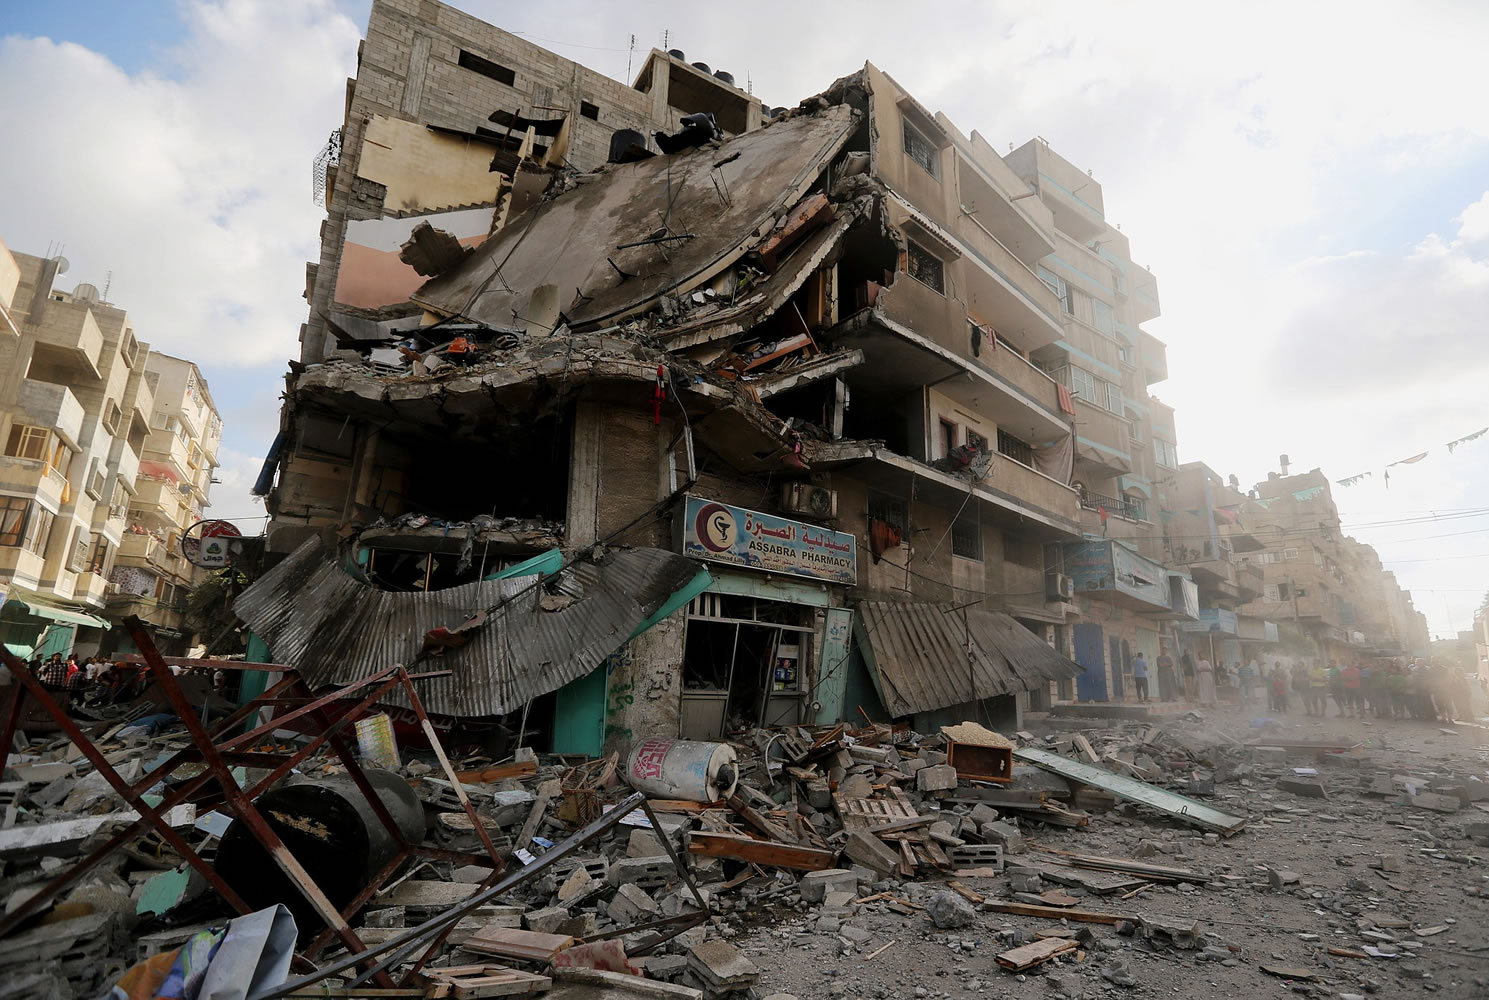 Palestinians inspect damage to an apartment building after it was hit by an Israeli missile strike today in Gaza City. Israeli troops pushed deeper into Gaza on Friday to destroy rocket launching sites and tunnels, firing volleys of tank shells and clashing with Palestinian fighters in a high-stakes ground offensive meant to weaken the enclaveu2019s Hamas rulers.